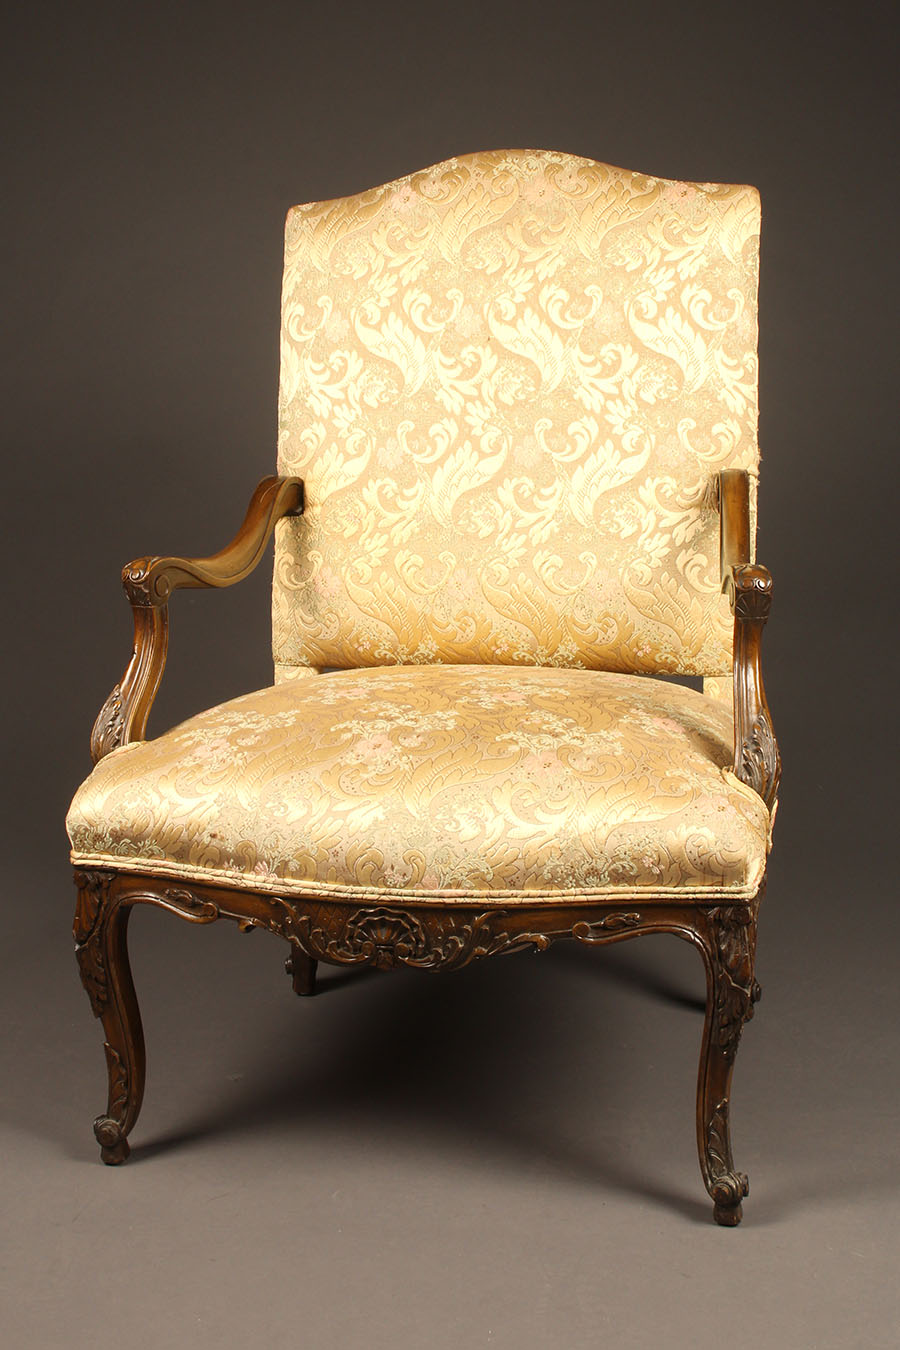 Antique French Louis Xv Styled Walnut Armchair